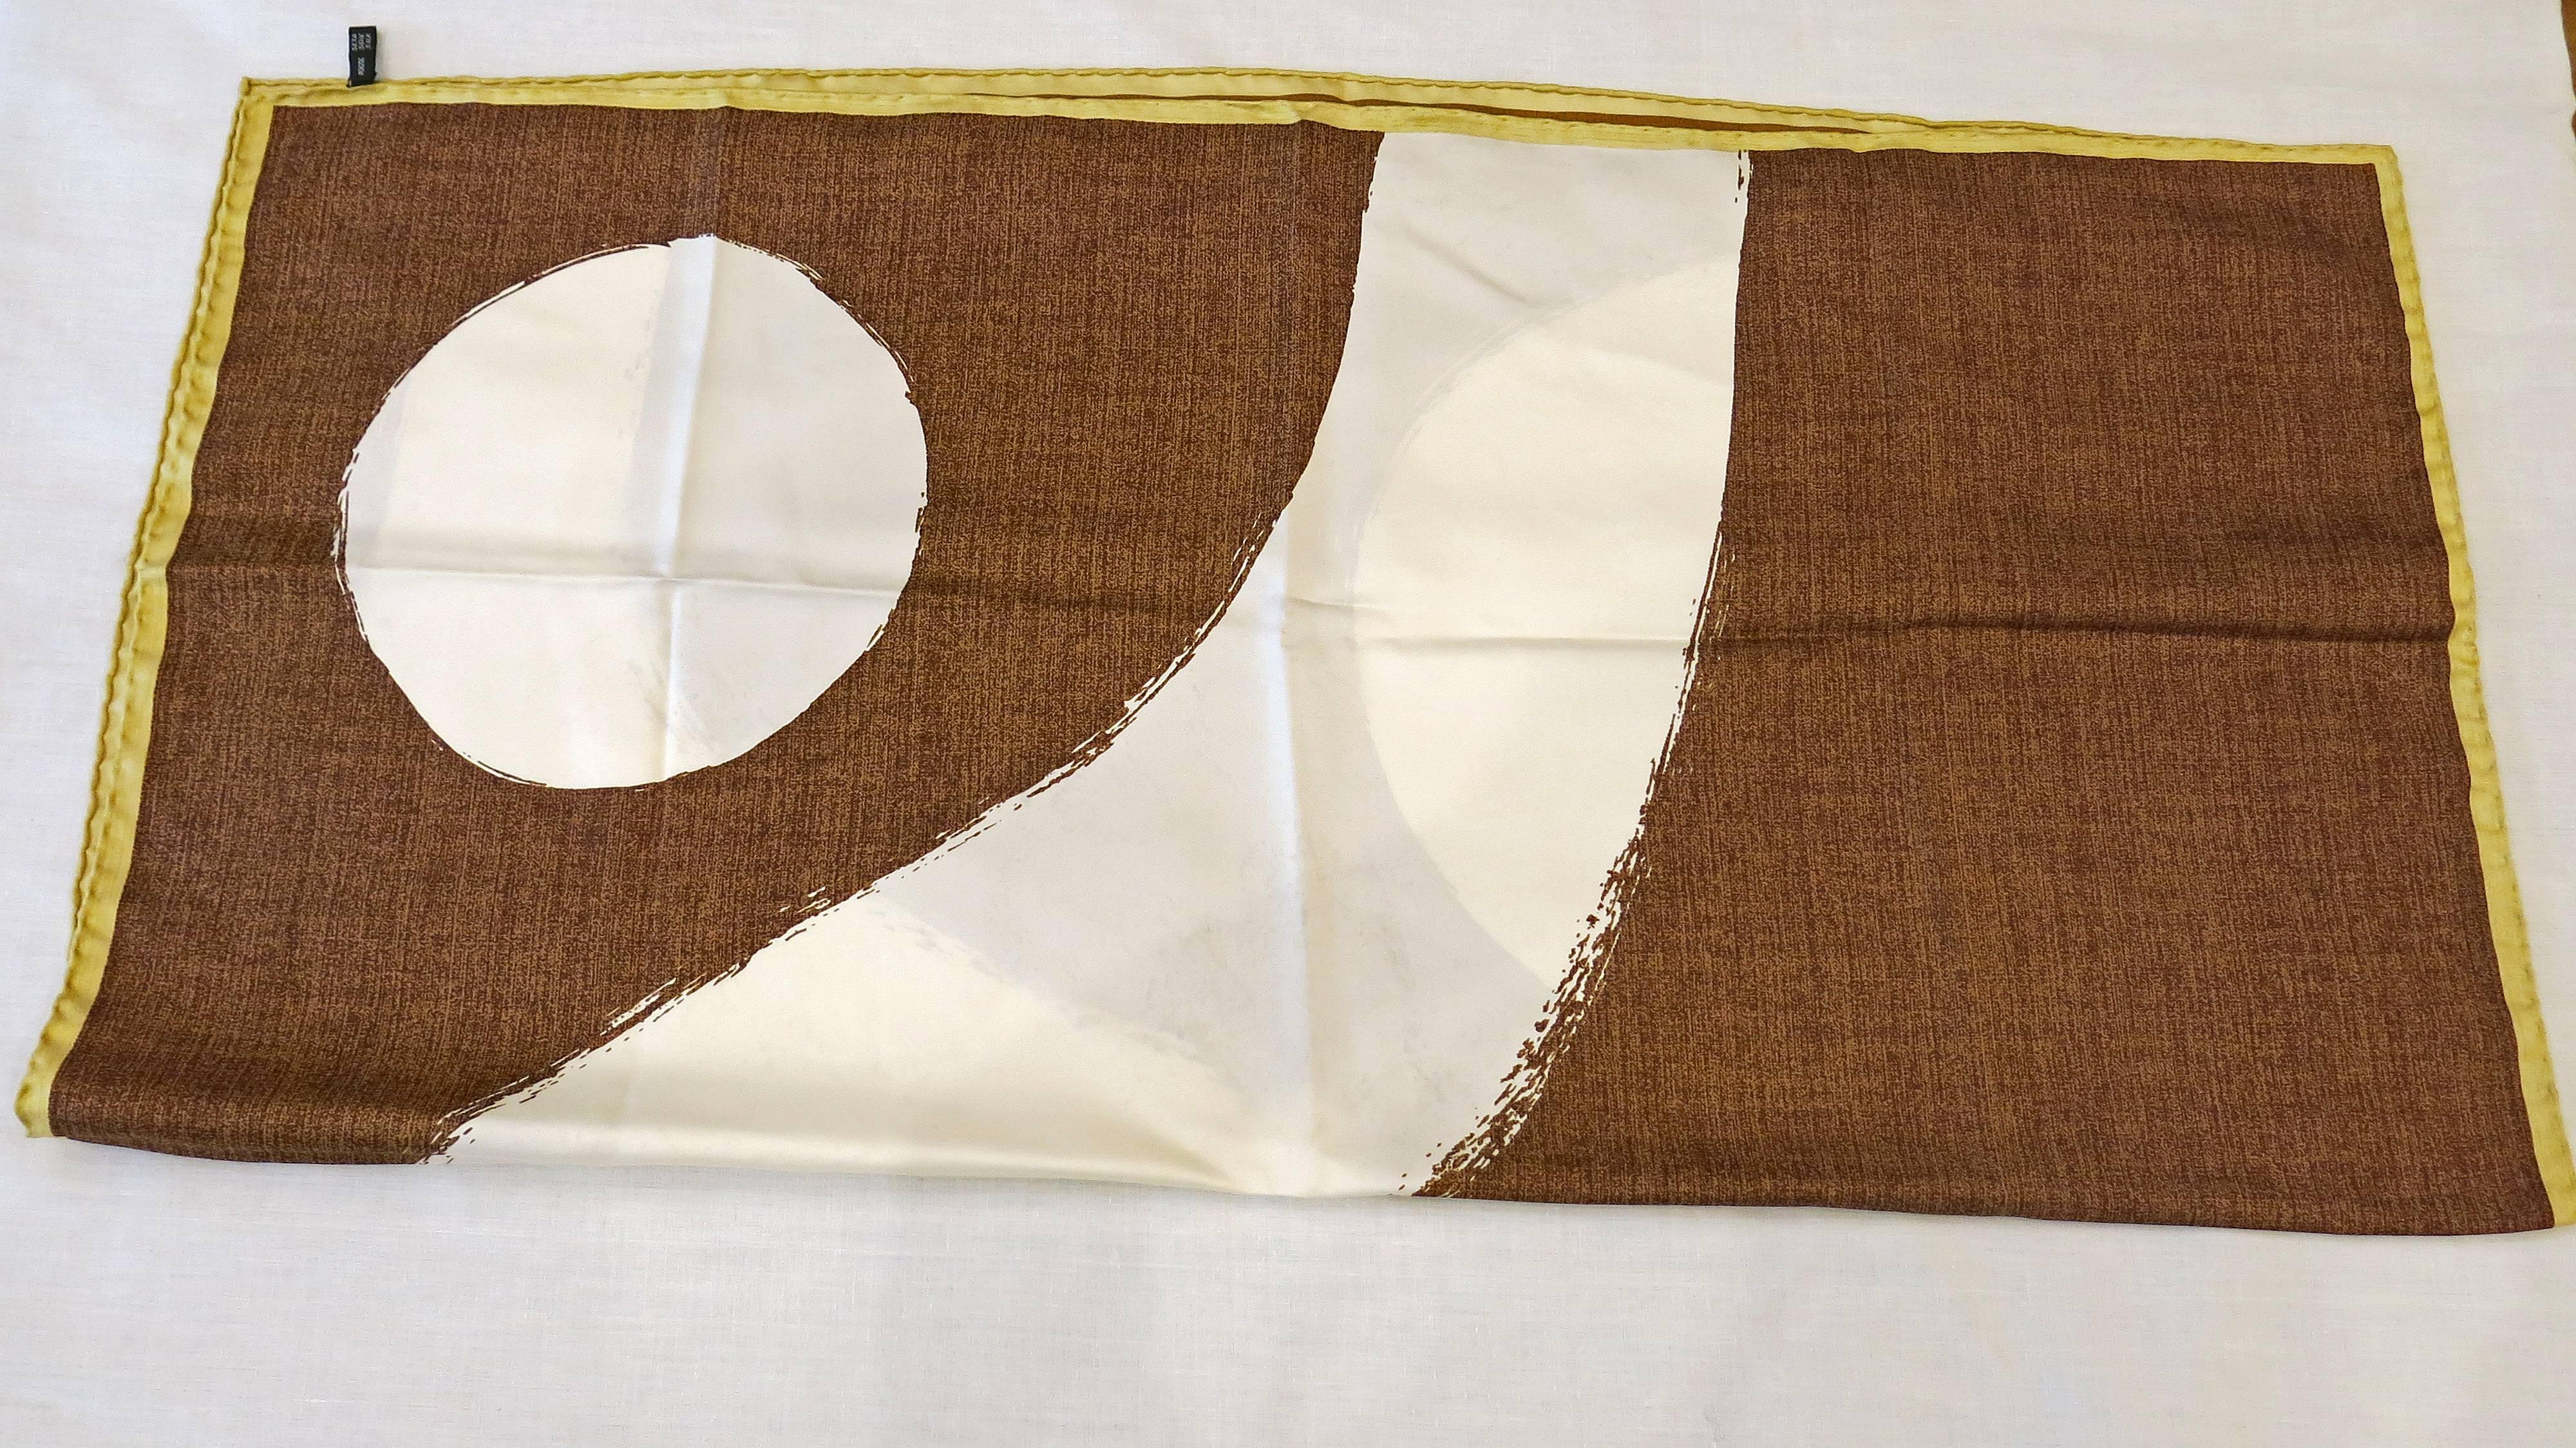 Cream brown and gold colored silk scarf with a design that imitates texture as well as two cream colored circles and a diagonal line that splits the two sides of the scarf in half. This design is reminiscent of a yin yang symbol. Scarf is gold